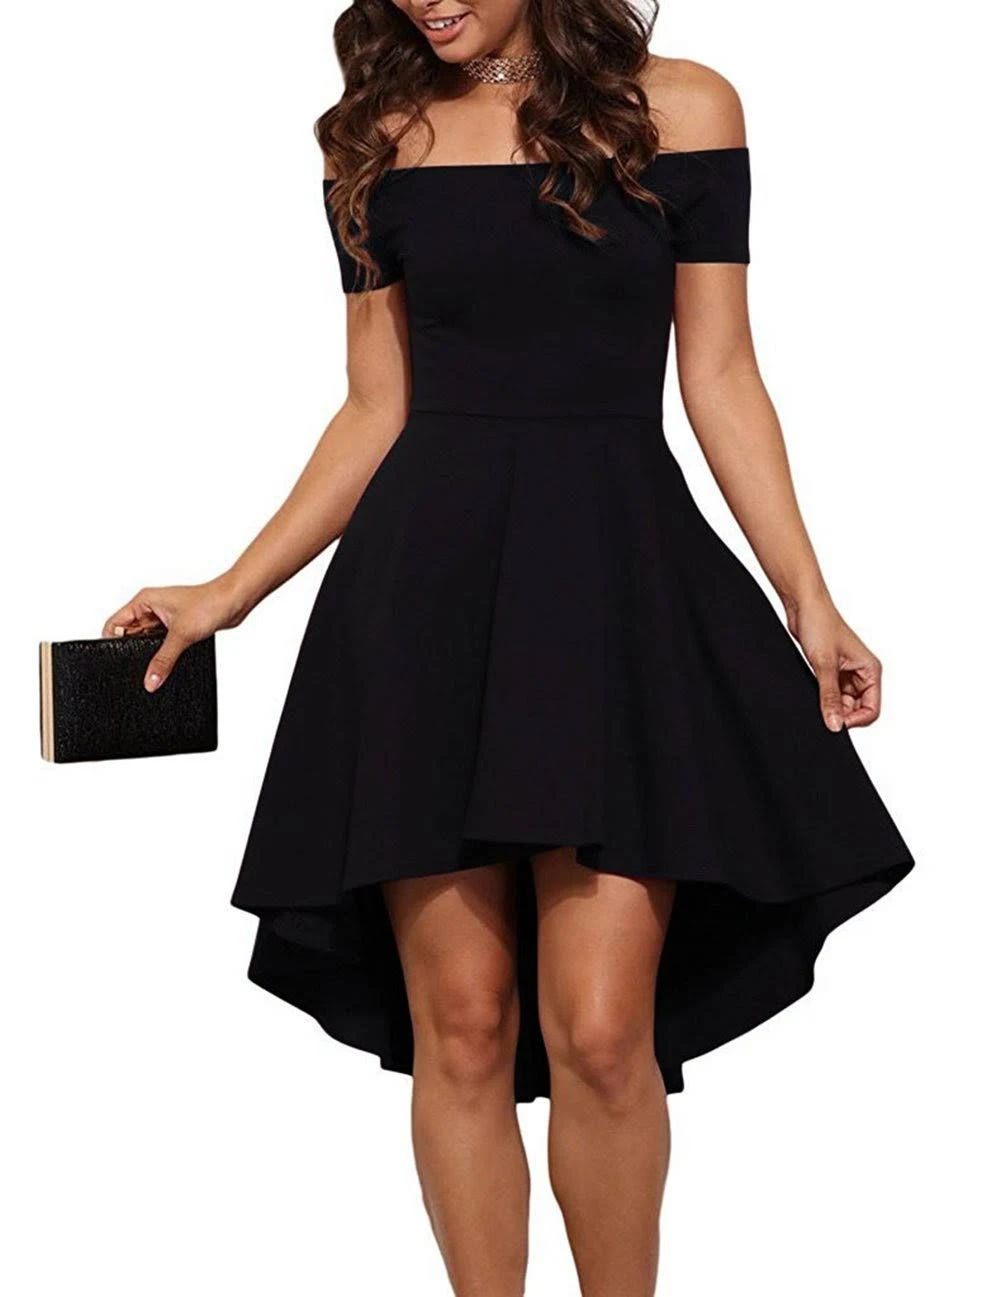 Sexy Off-Shoulder High-Low Cocktail Skater Dress for Parties | Image